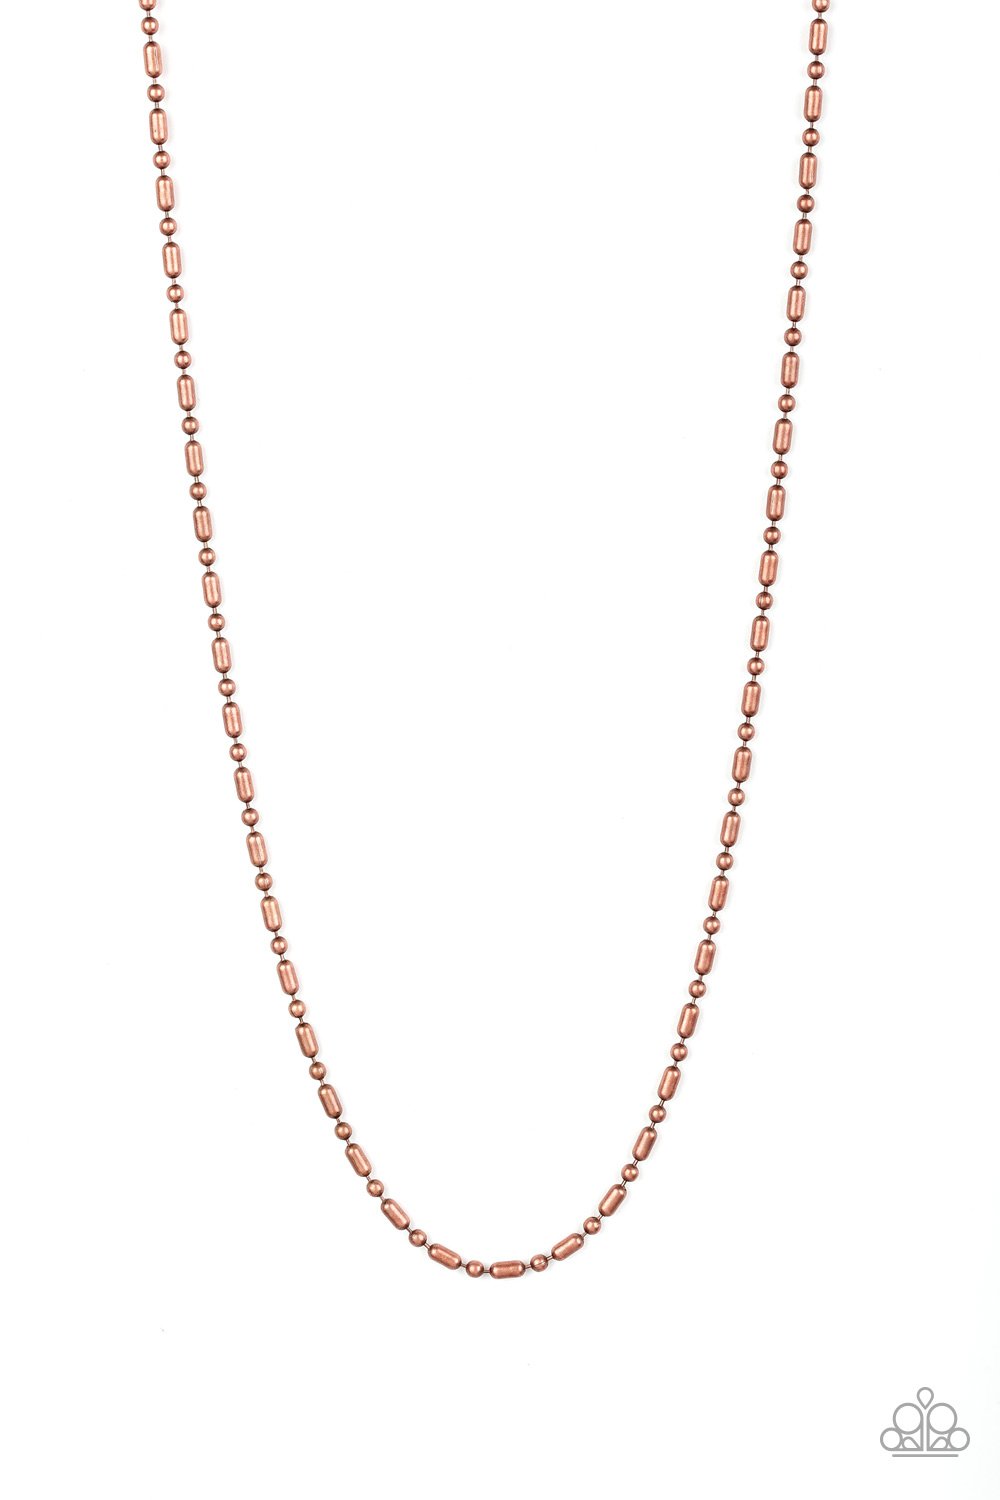 Covert Operation Copper Necklace - Daria's Blings N Things